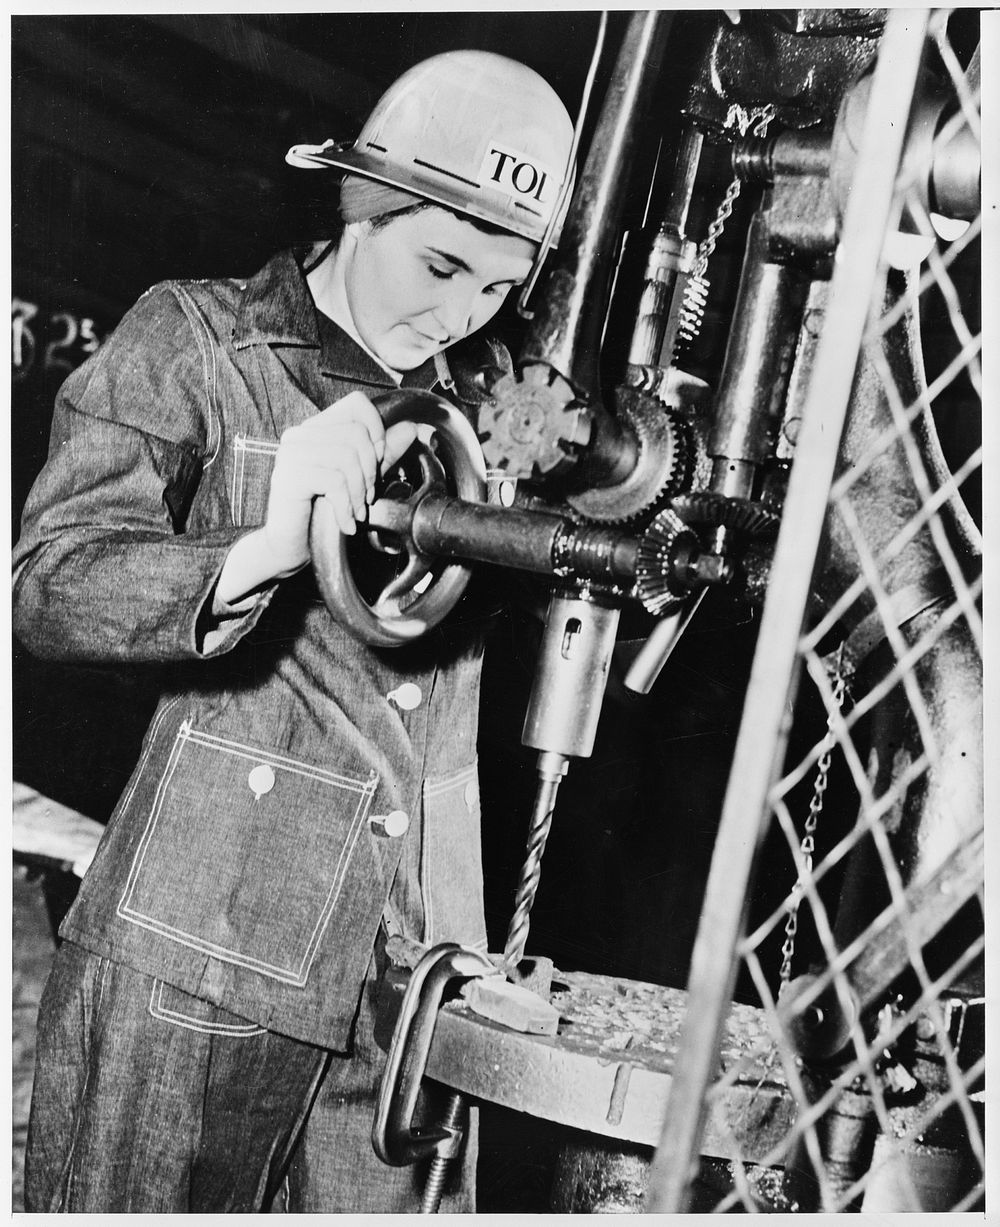 Drill press operator in a machine shop. Sourced from the Library of Congress.